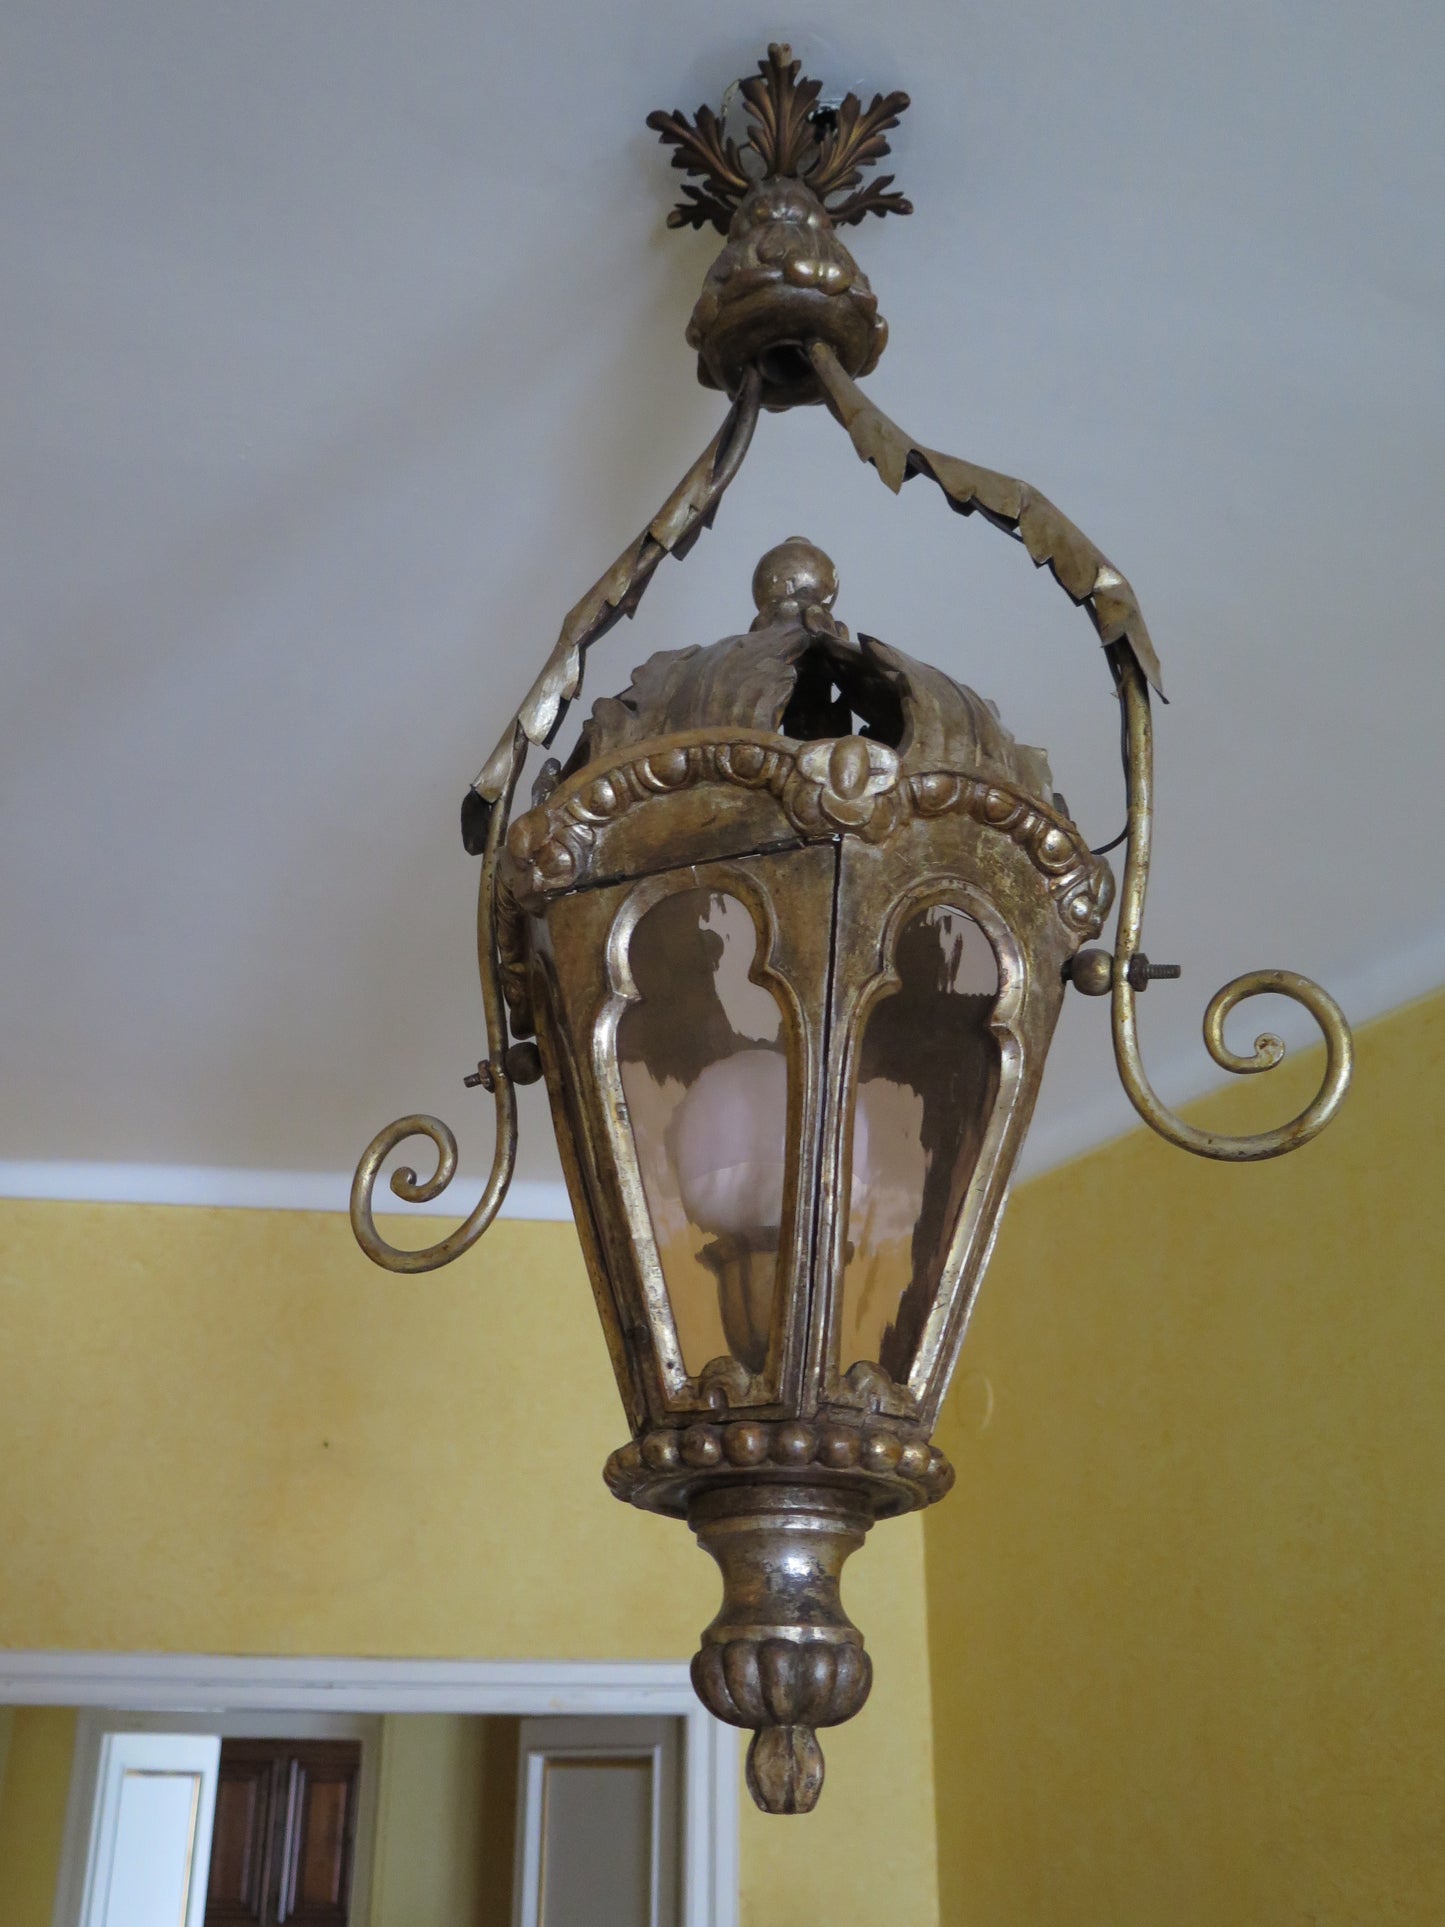 Antique lantern chandelier wood and gilded iron handcrafted classic vs